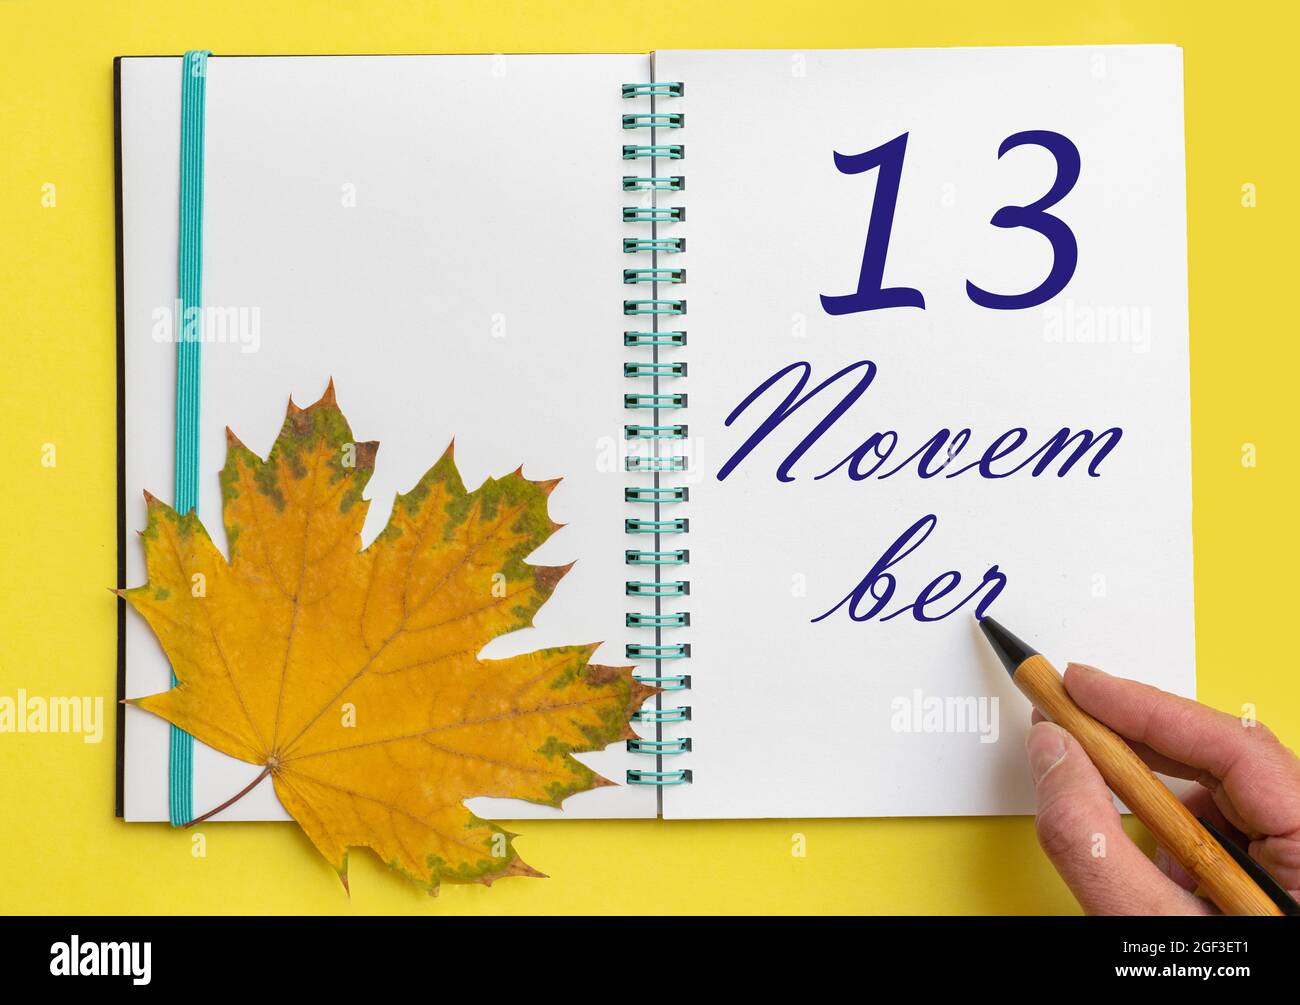 13th day of november. Hand writing the date 13 november in an open notebook with a beautiful natural maple leaf on a yellow background. Autumn month, Stock Photo